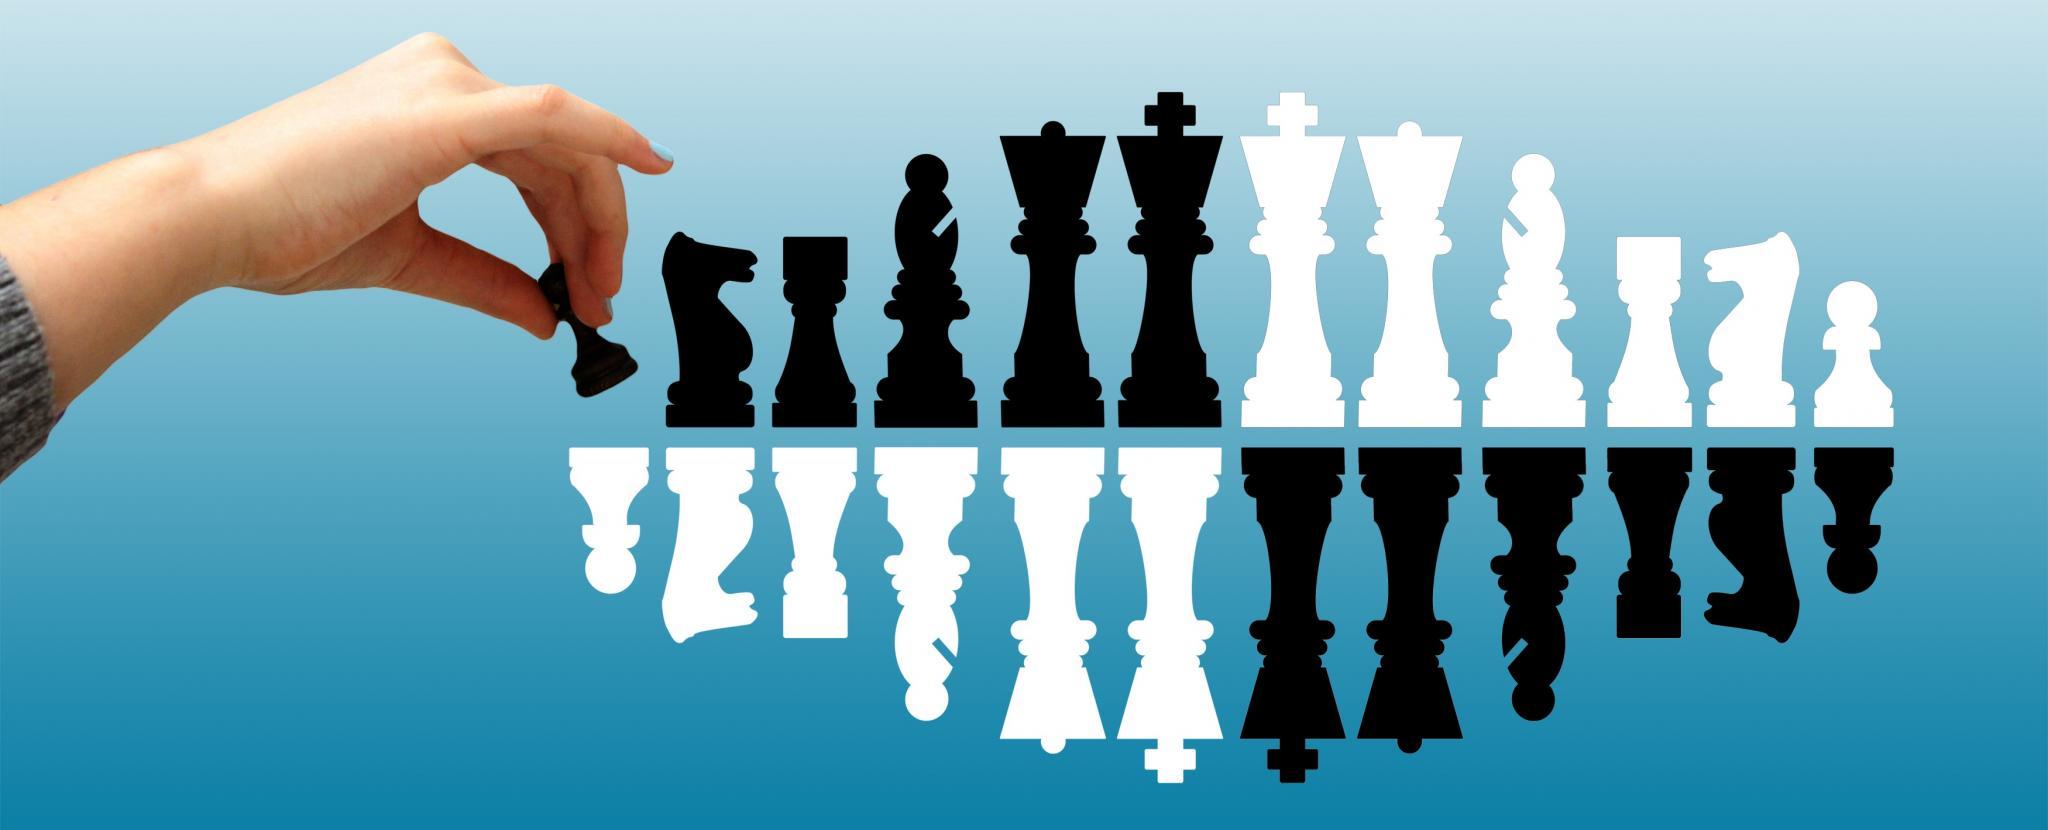 Chess.. choose a strategy and adapt as necessary